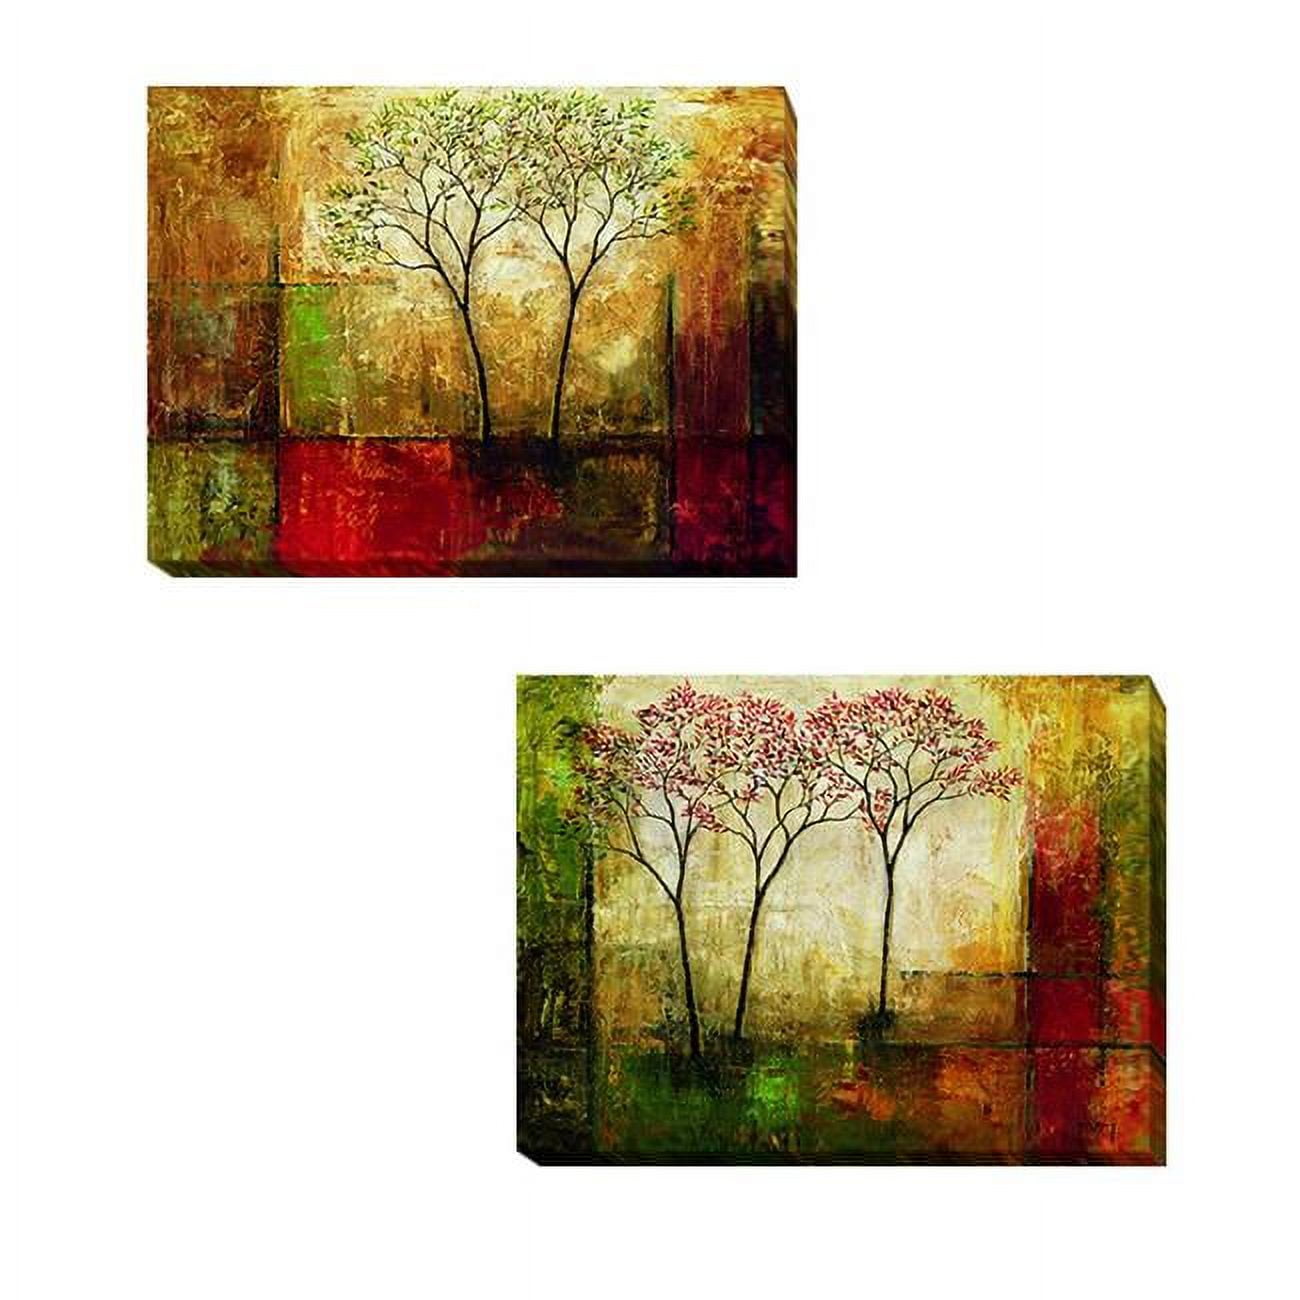 1216am511tg Morning Luster I & Ii By Mike Klung 2-piece Premium Gallery-wrapped Canvas Giclee Art Set - 12 X 16 X 1.5 In.